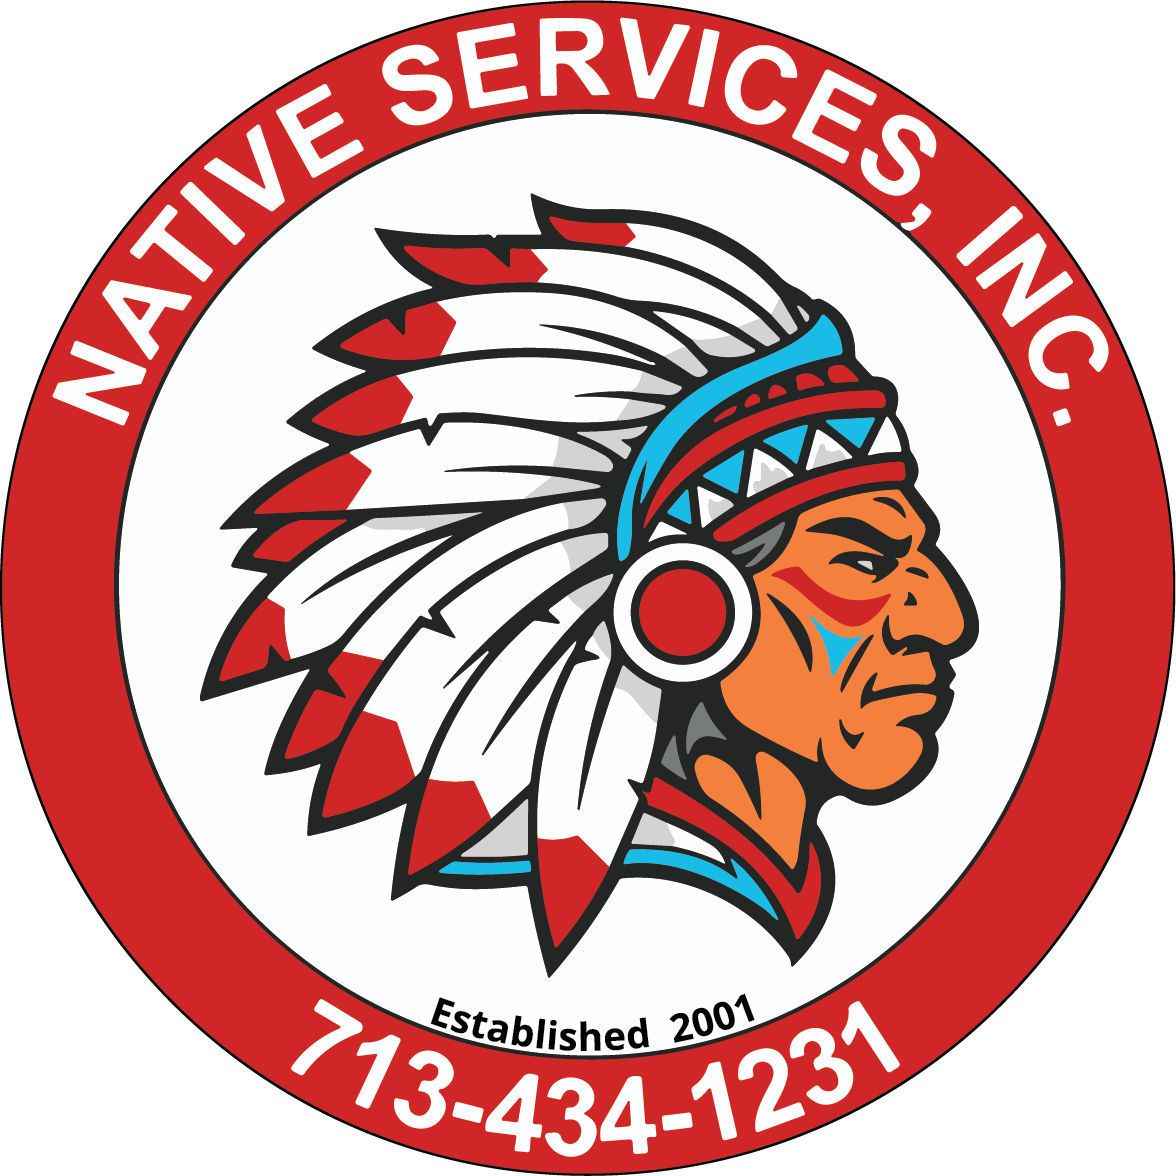 Native Services Mass Excavation in Houston Texas